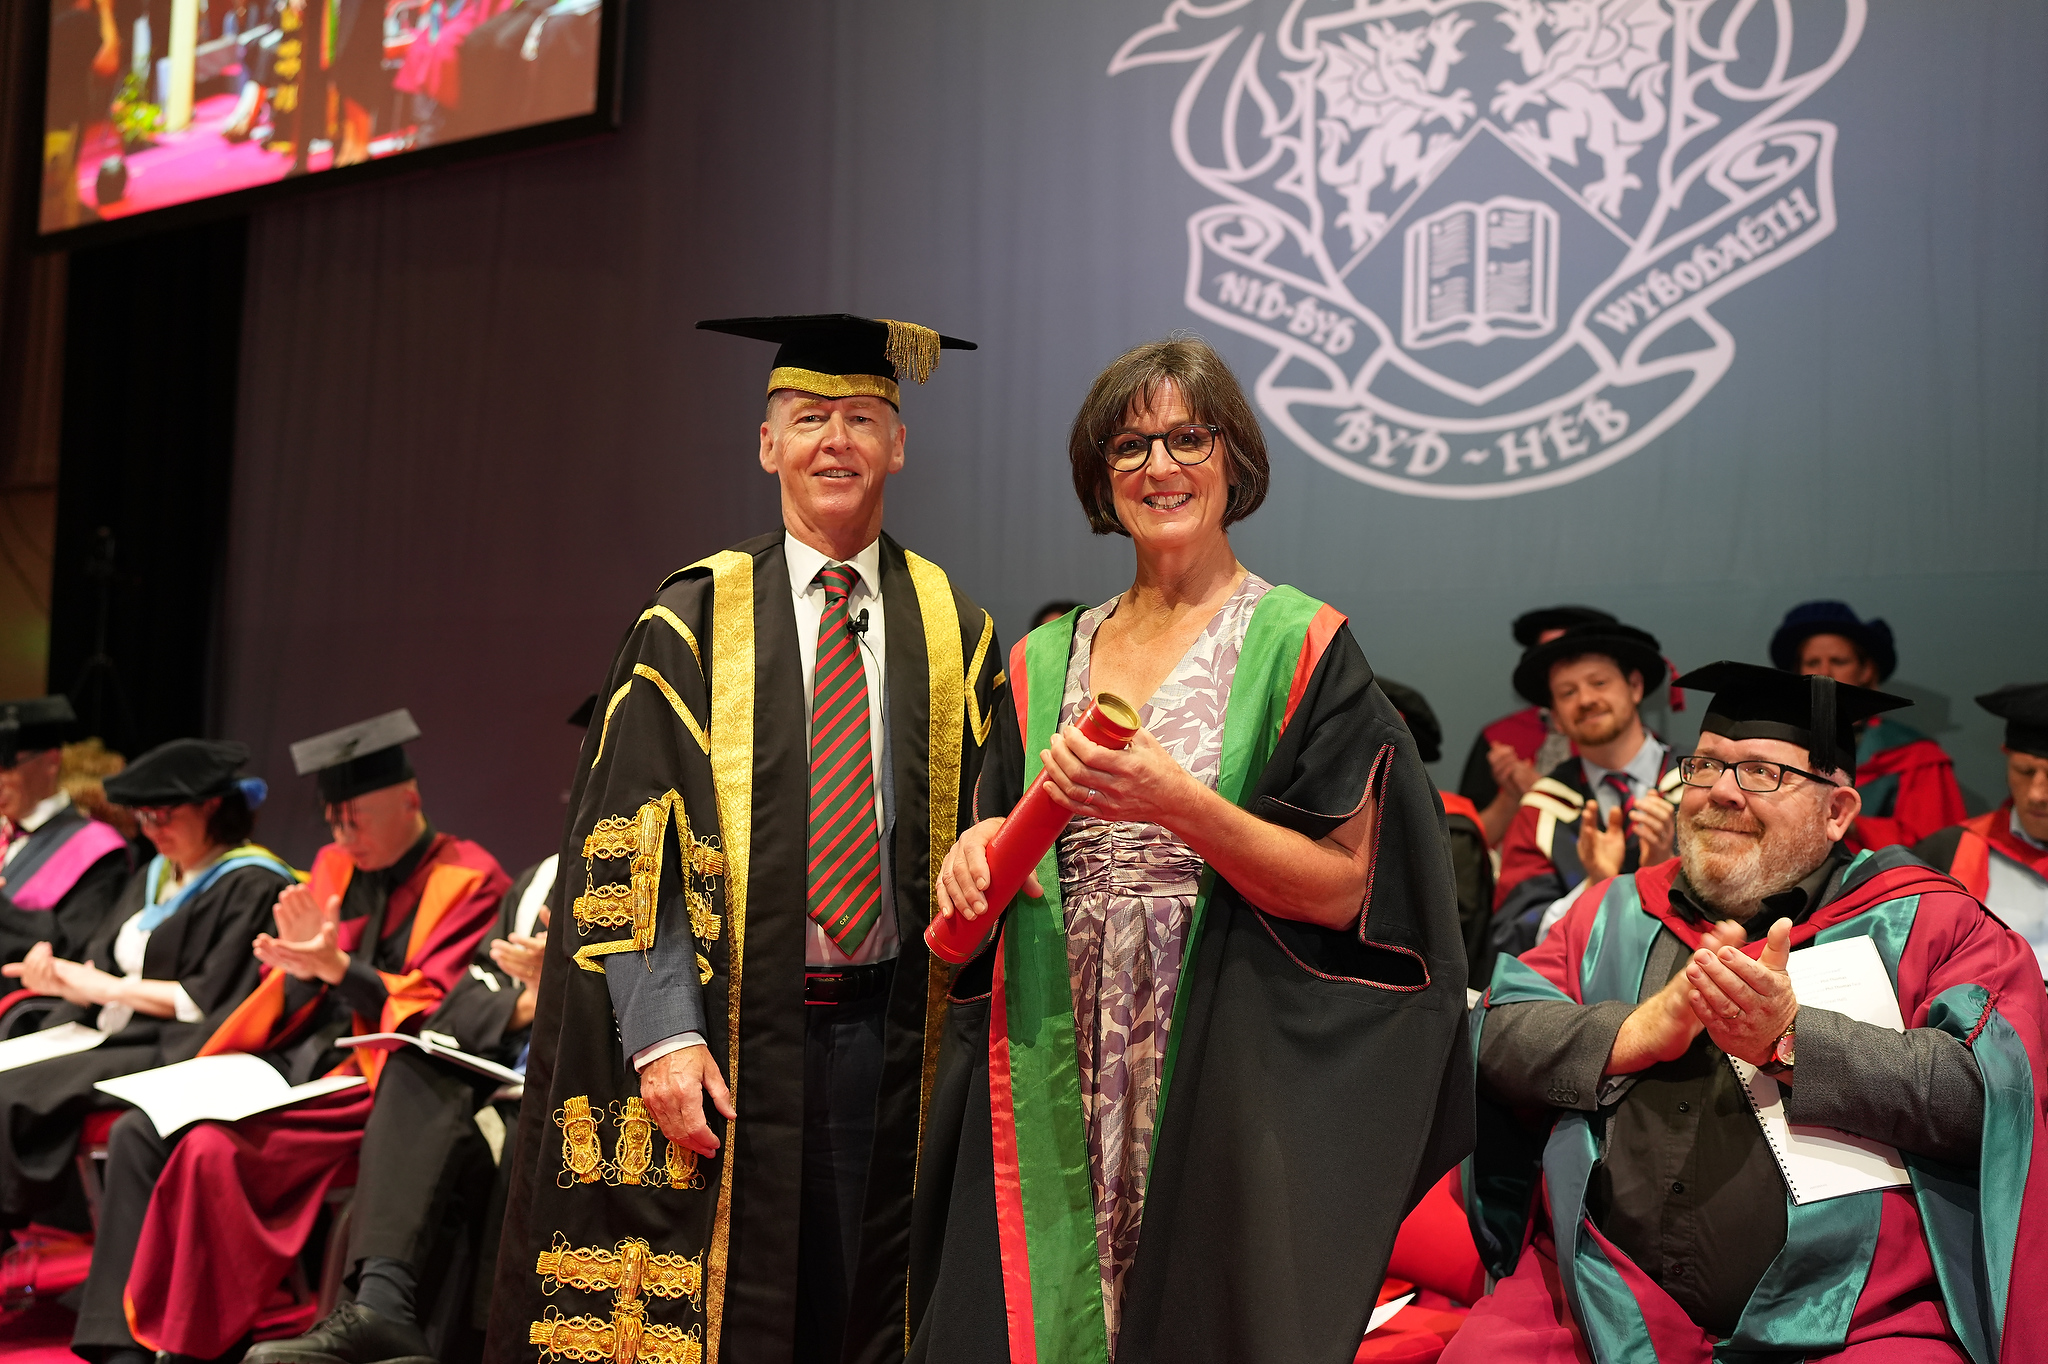 Dr Emyr Roberts, Chair of Aberystwyth University Council, presenting an Honorary Fellowship to Dr Kate O'Sullivan